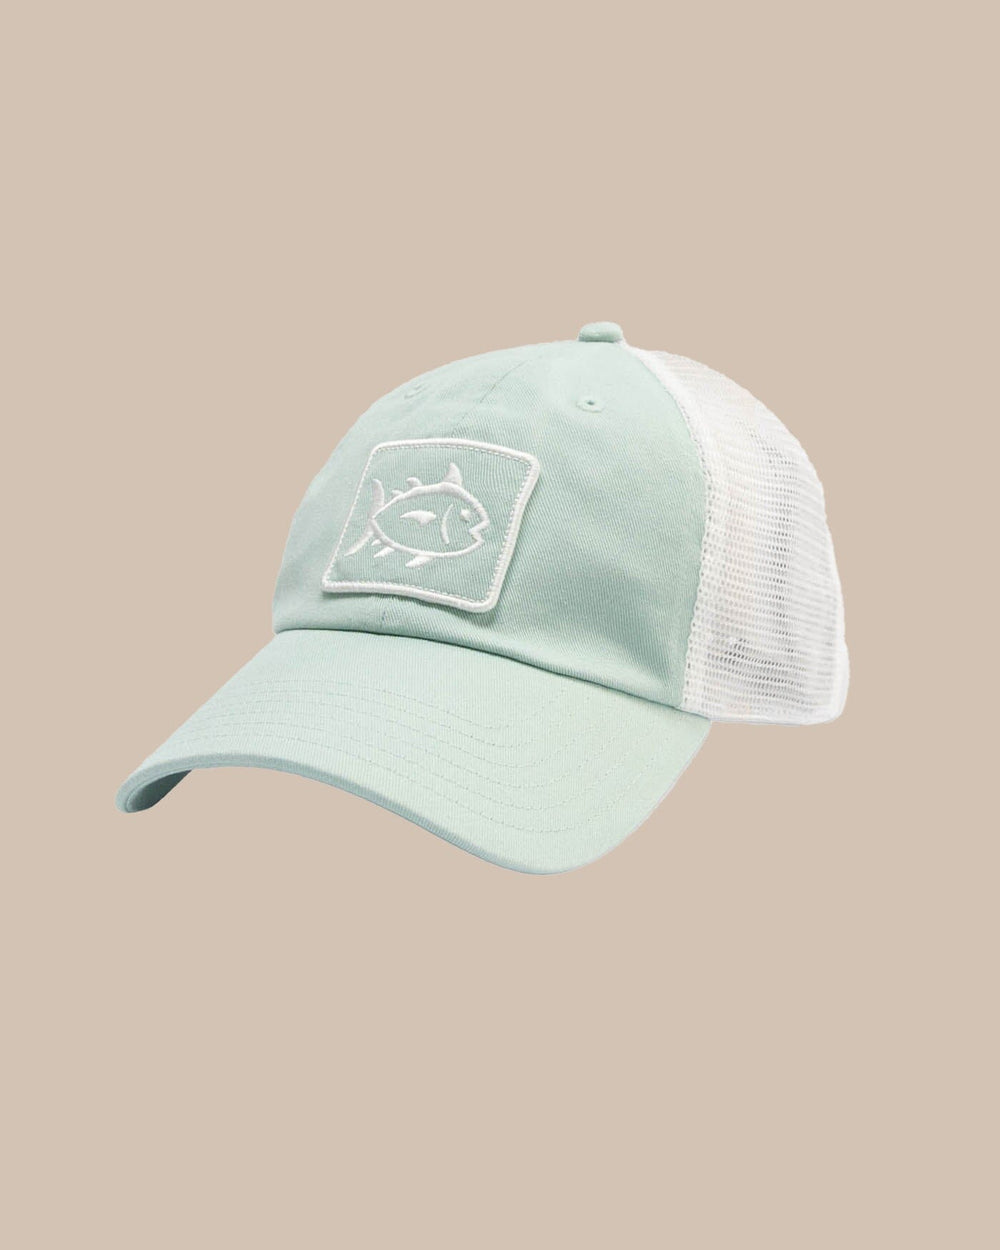 The front view of the Southern Tide Sun Farer Skipjack Fly Patch Trucker Hat by Southern Tide - Surf Spray Sage